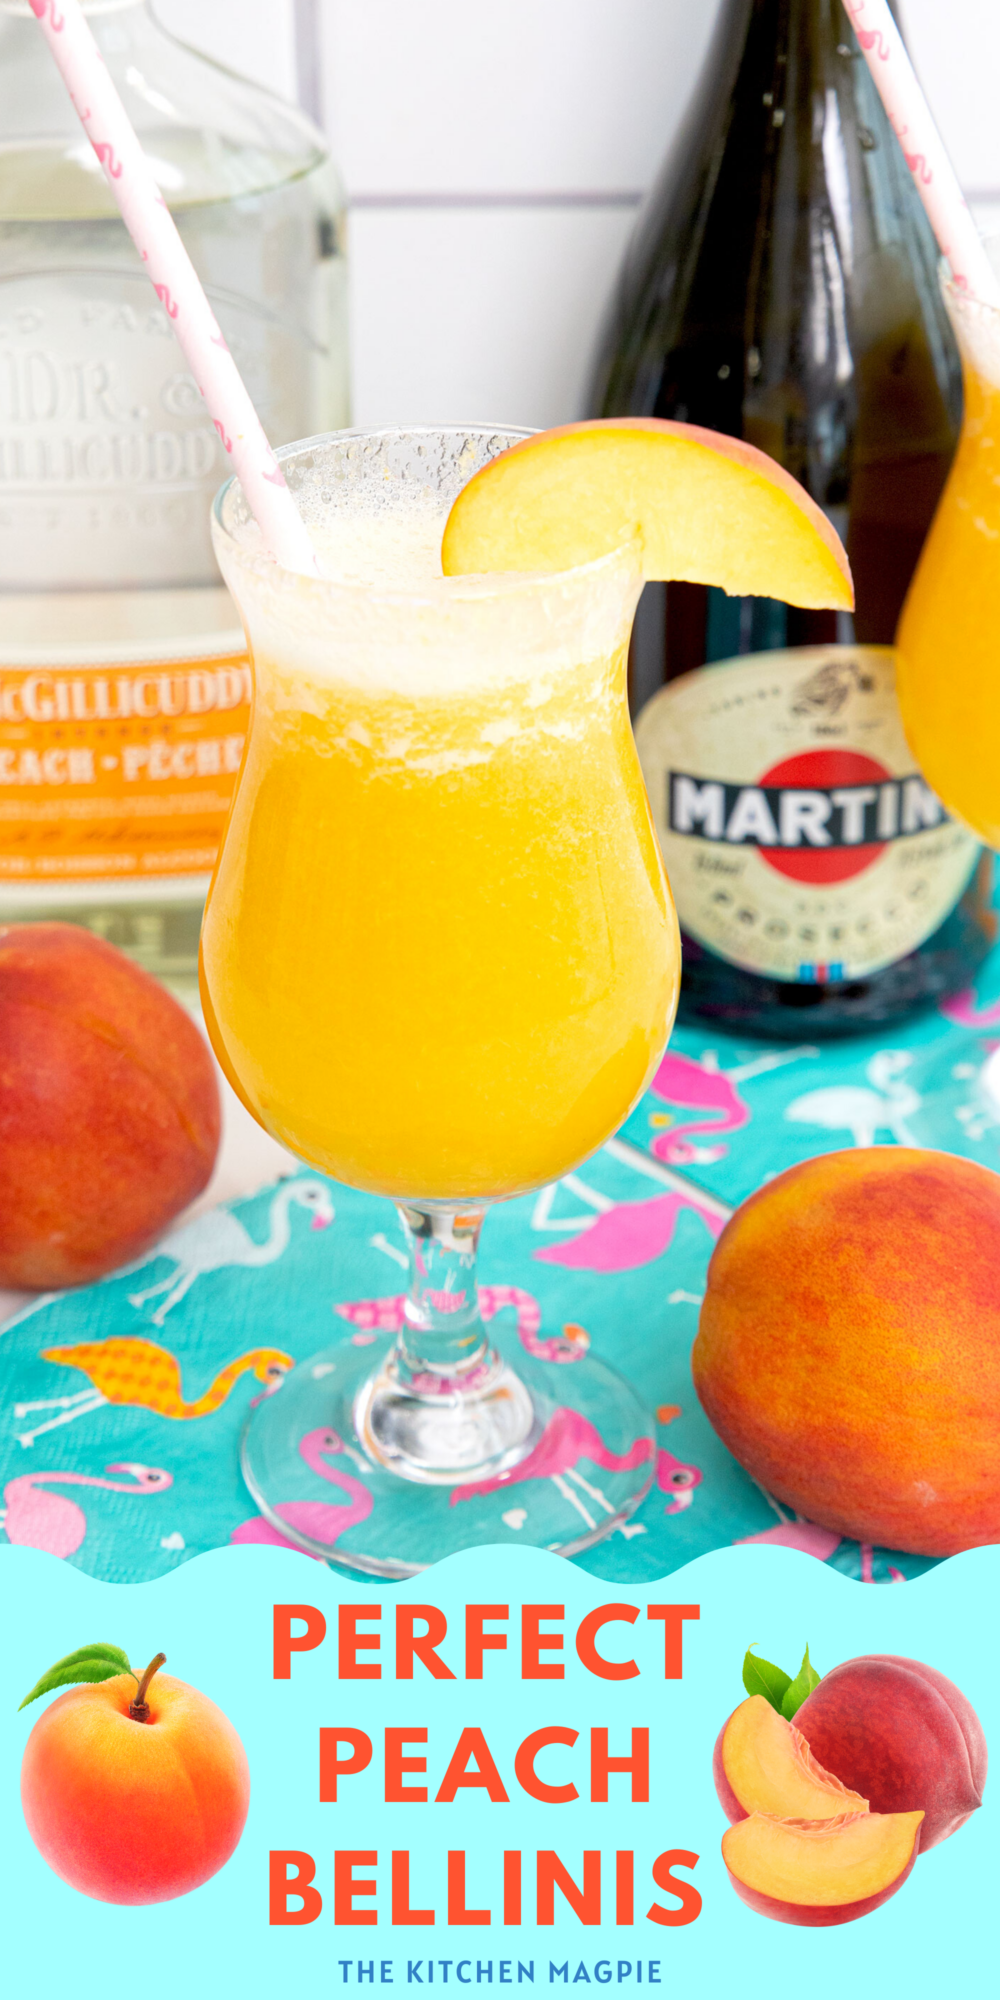 Bellini's are one of the easiest and most popular summer cocktails out there and this Peach Bellini is no exception. A simple combination of delicious Prosecco, peach schnapps, and peach purée makes this one of my favorites for sipping on the deck. 